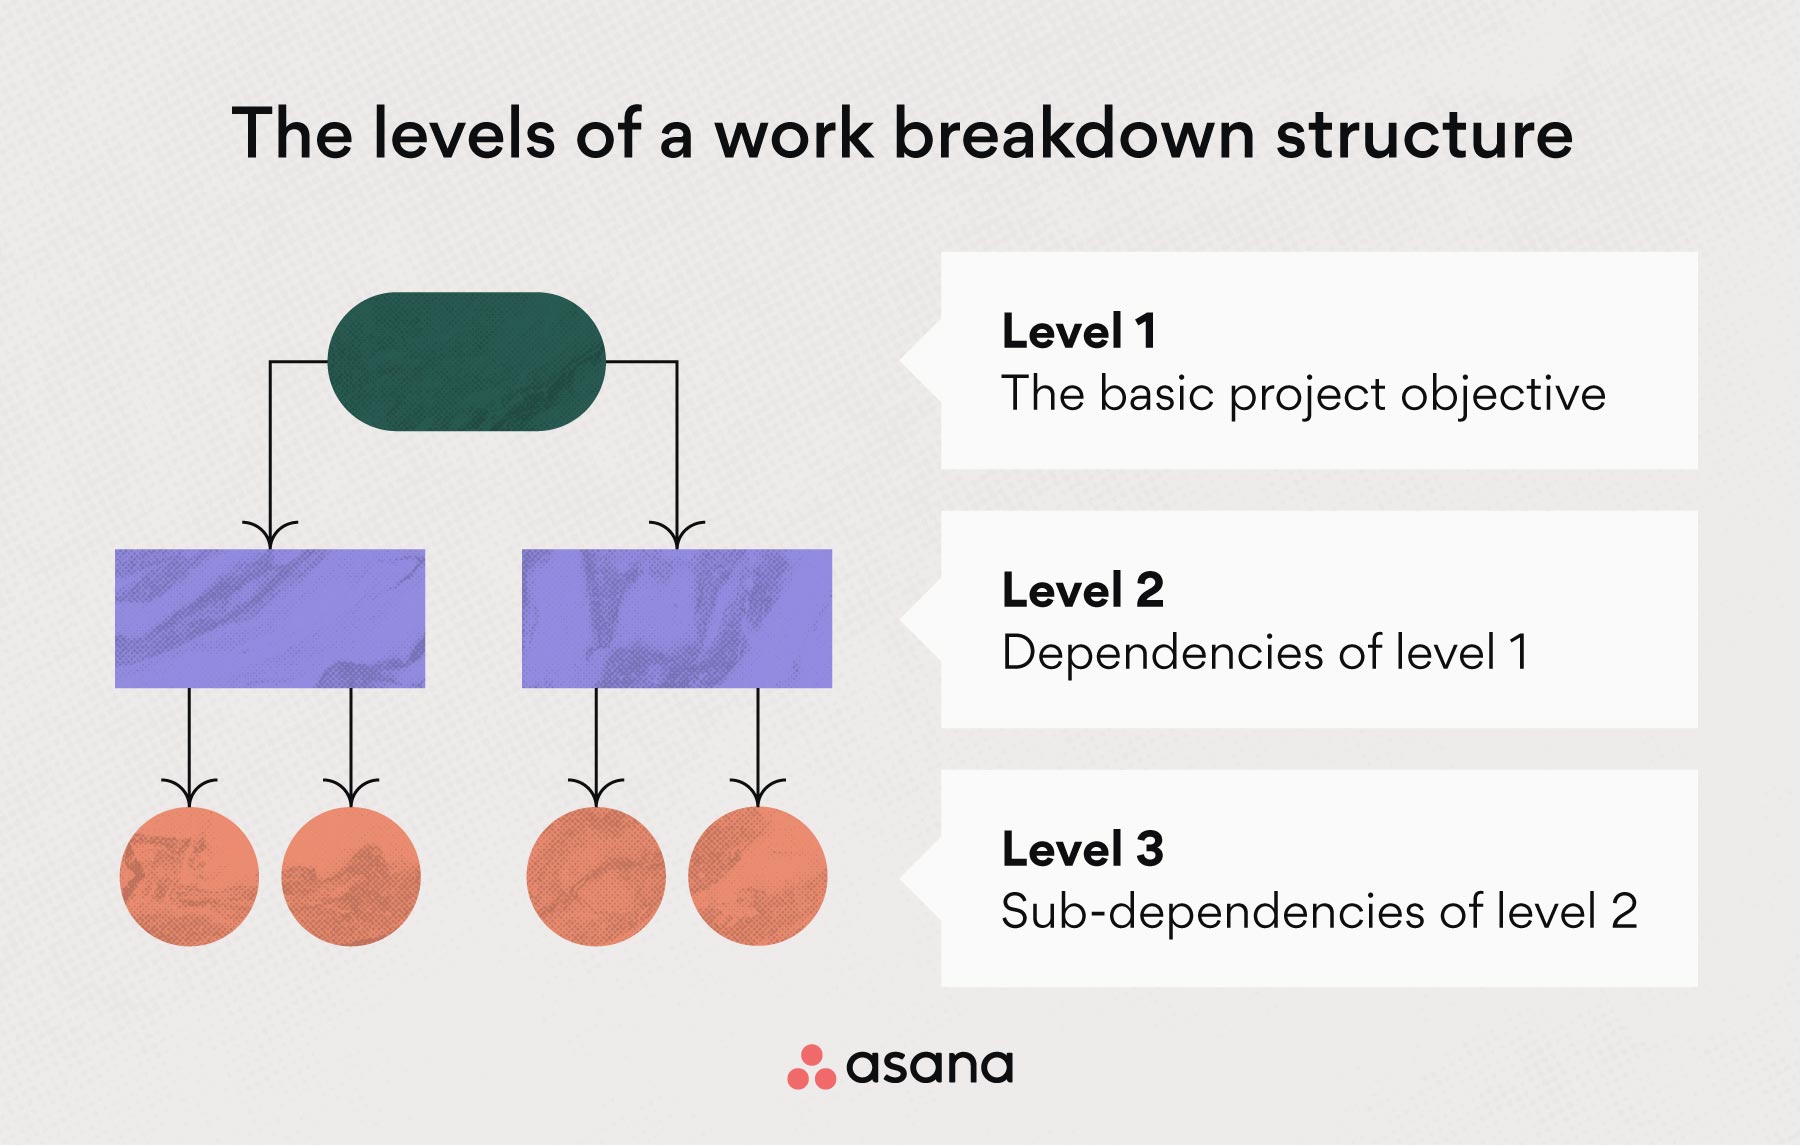 Levels of a work breakdown structure